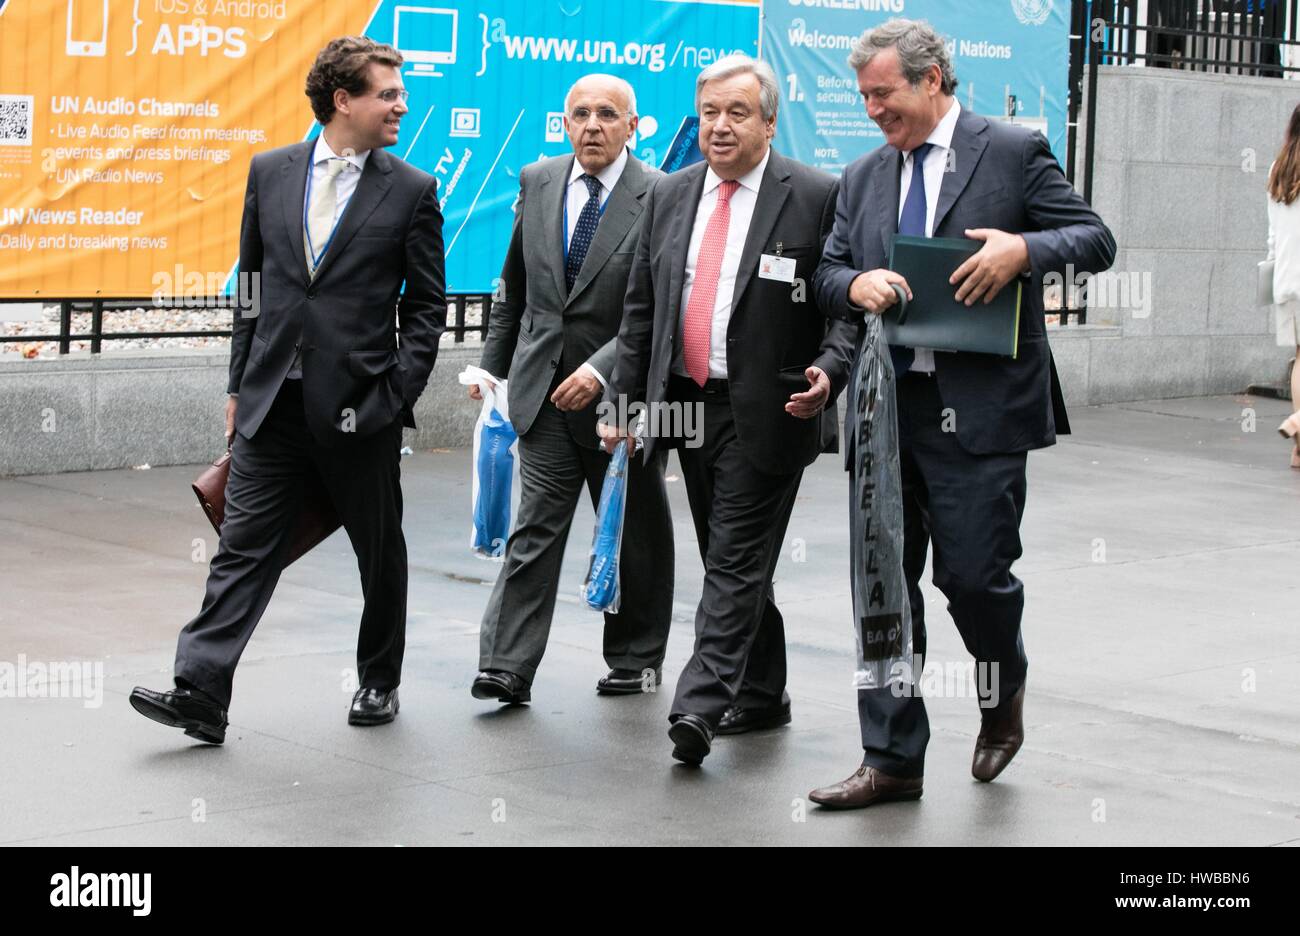 United Nations, New York, USA, September 19 2016 - Candid photos of Antonio Guterres, former UN High Commissioner for Refugees and candidate for the position of next United Nations Secretary-General  During the 71th General Assembly Meetings today at the UN Headquarters in New York. Photo: Luiz Rampelotto/EuropaNewswire | usage worldwide Stock Photo